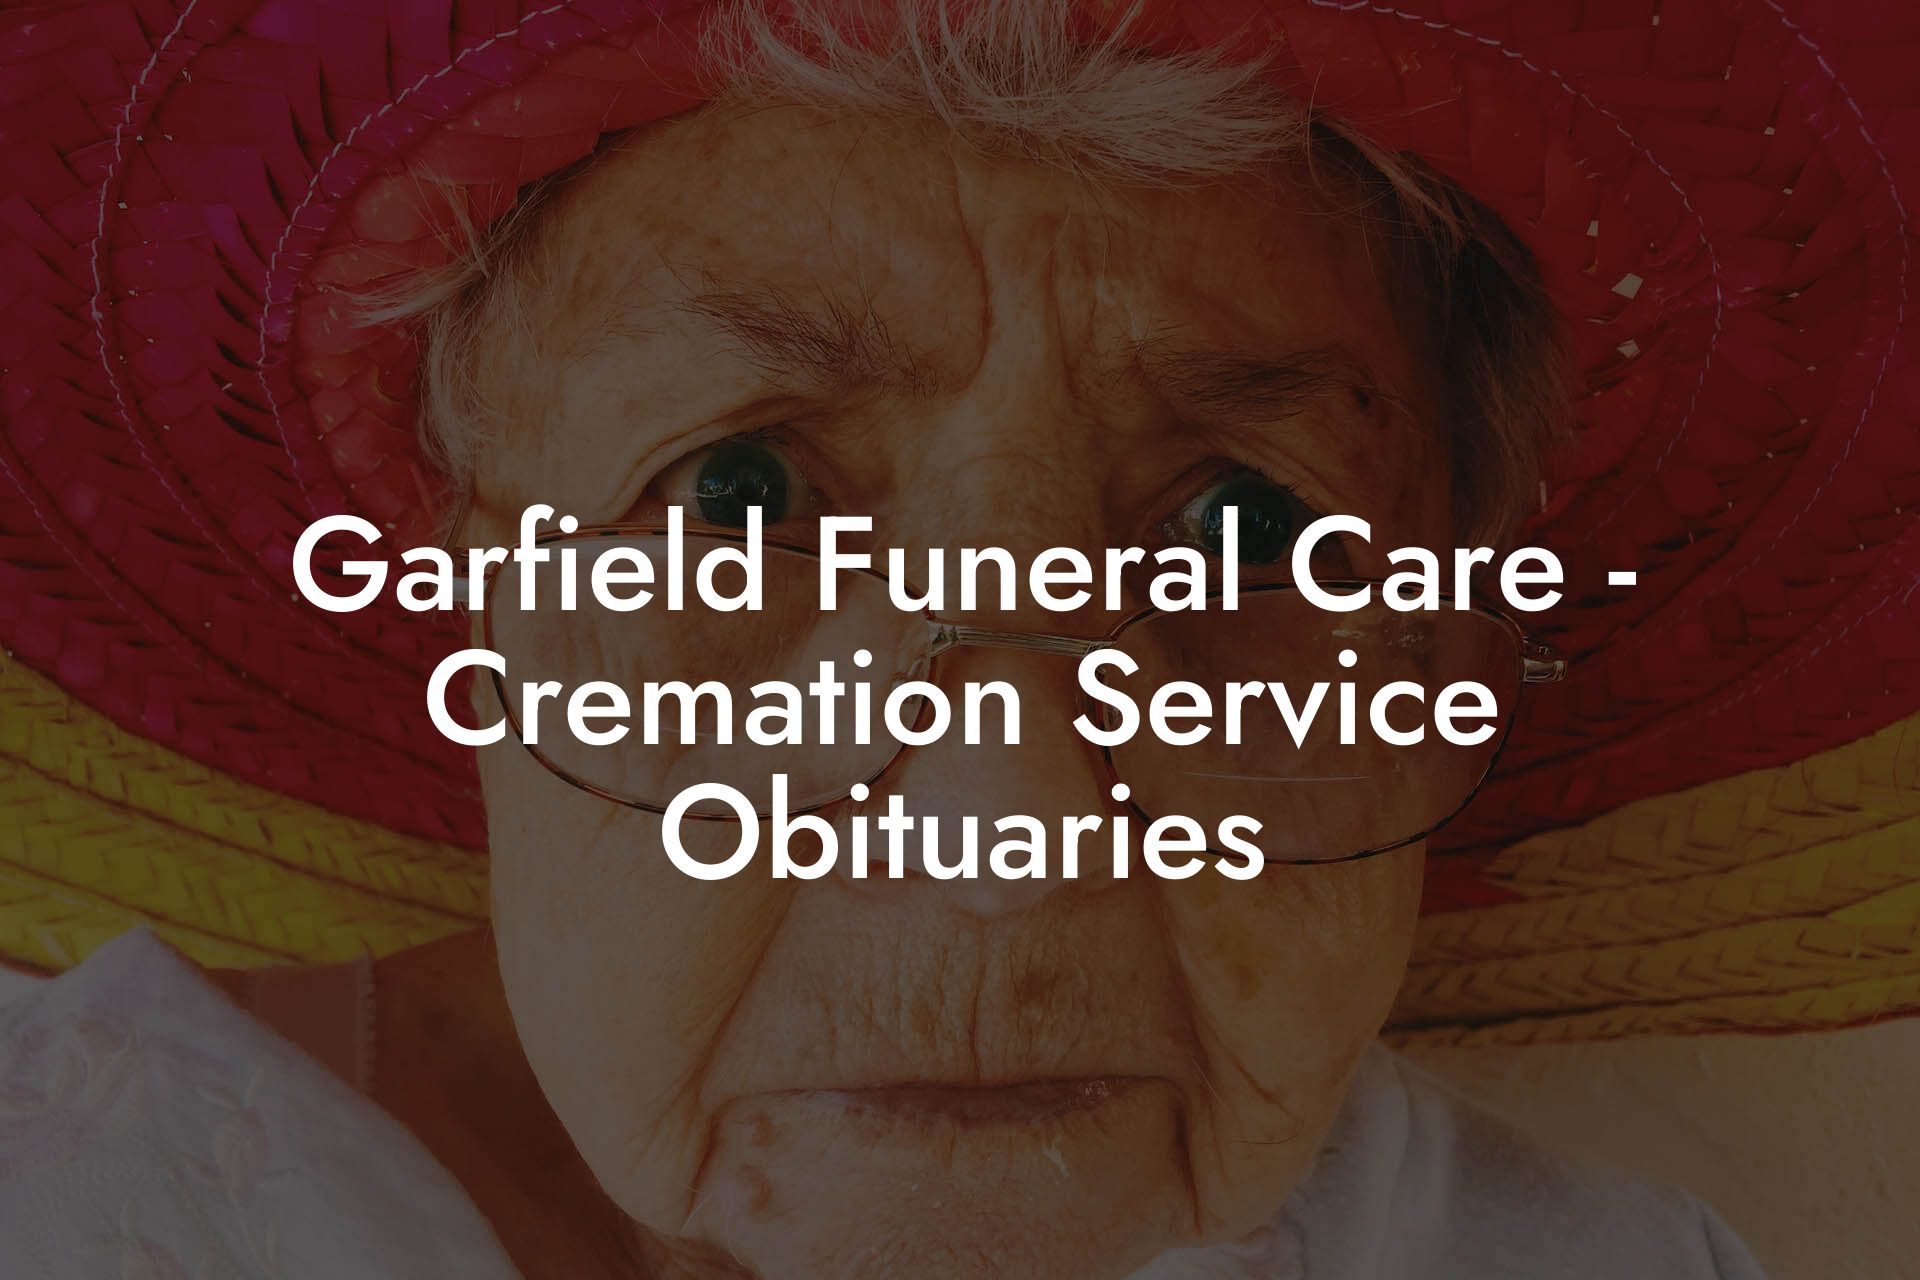 Garfield Funeral Care - Cremation Service Obituaries